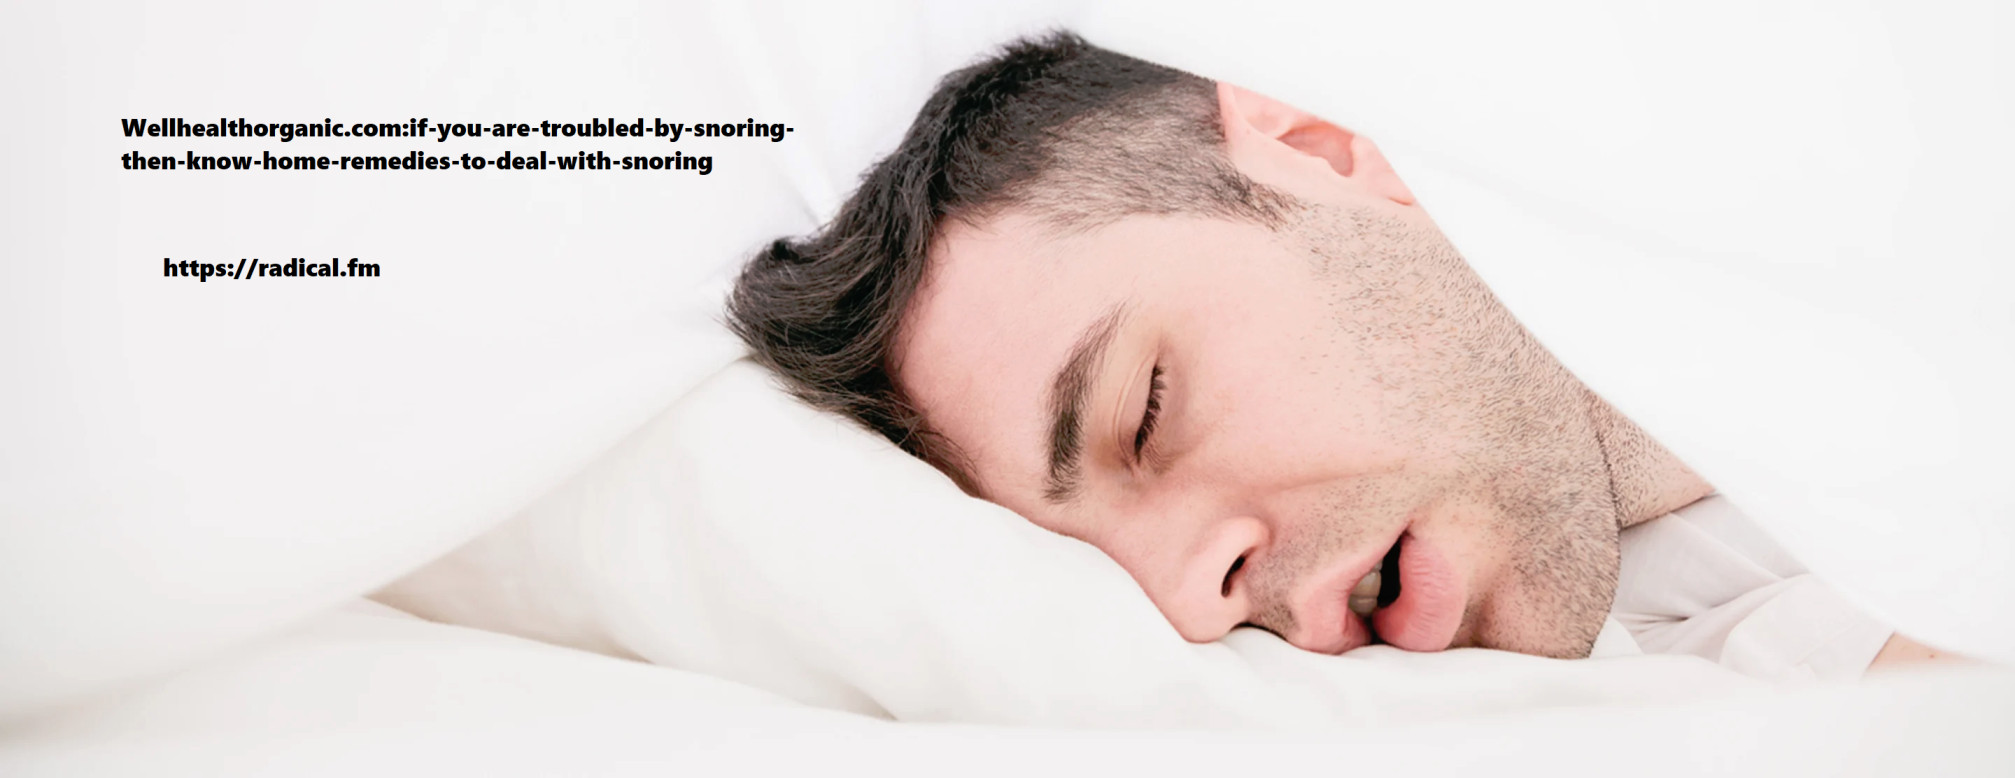 Wellhealthorganic.com:if-you-are-troubled-by-snoring-then-know-home-remedies-to-deal-with-snoring